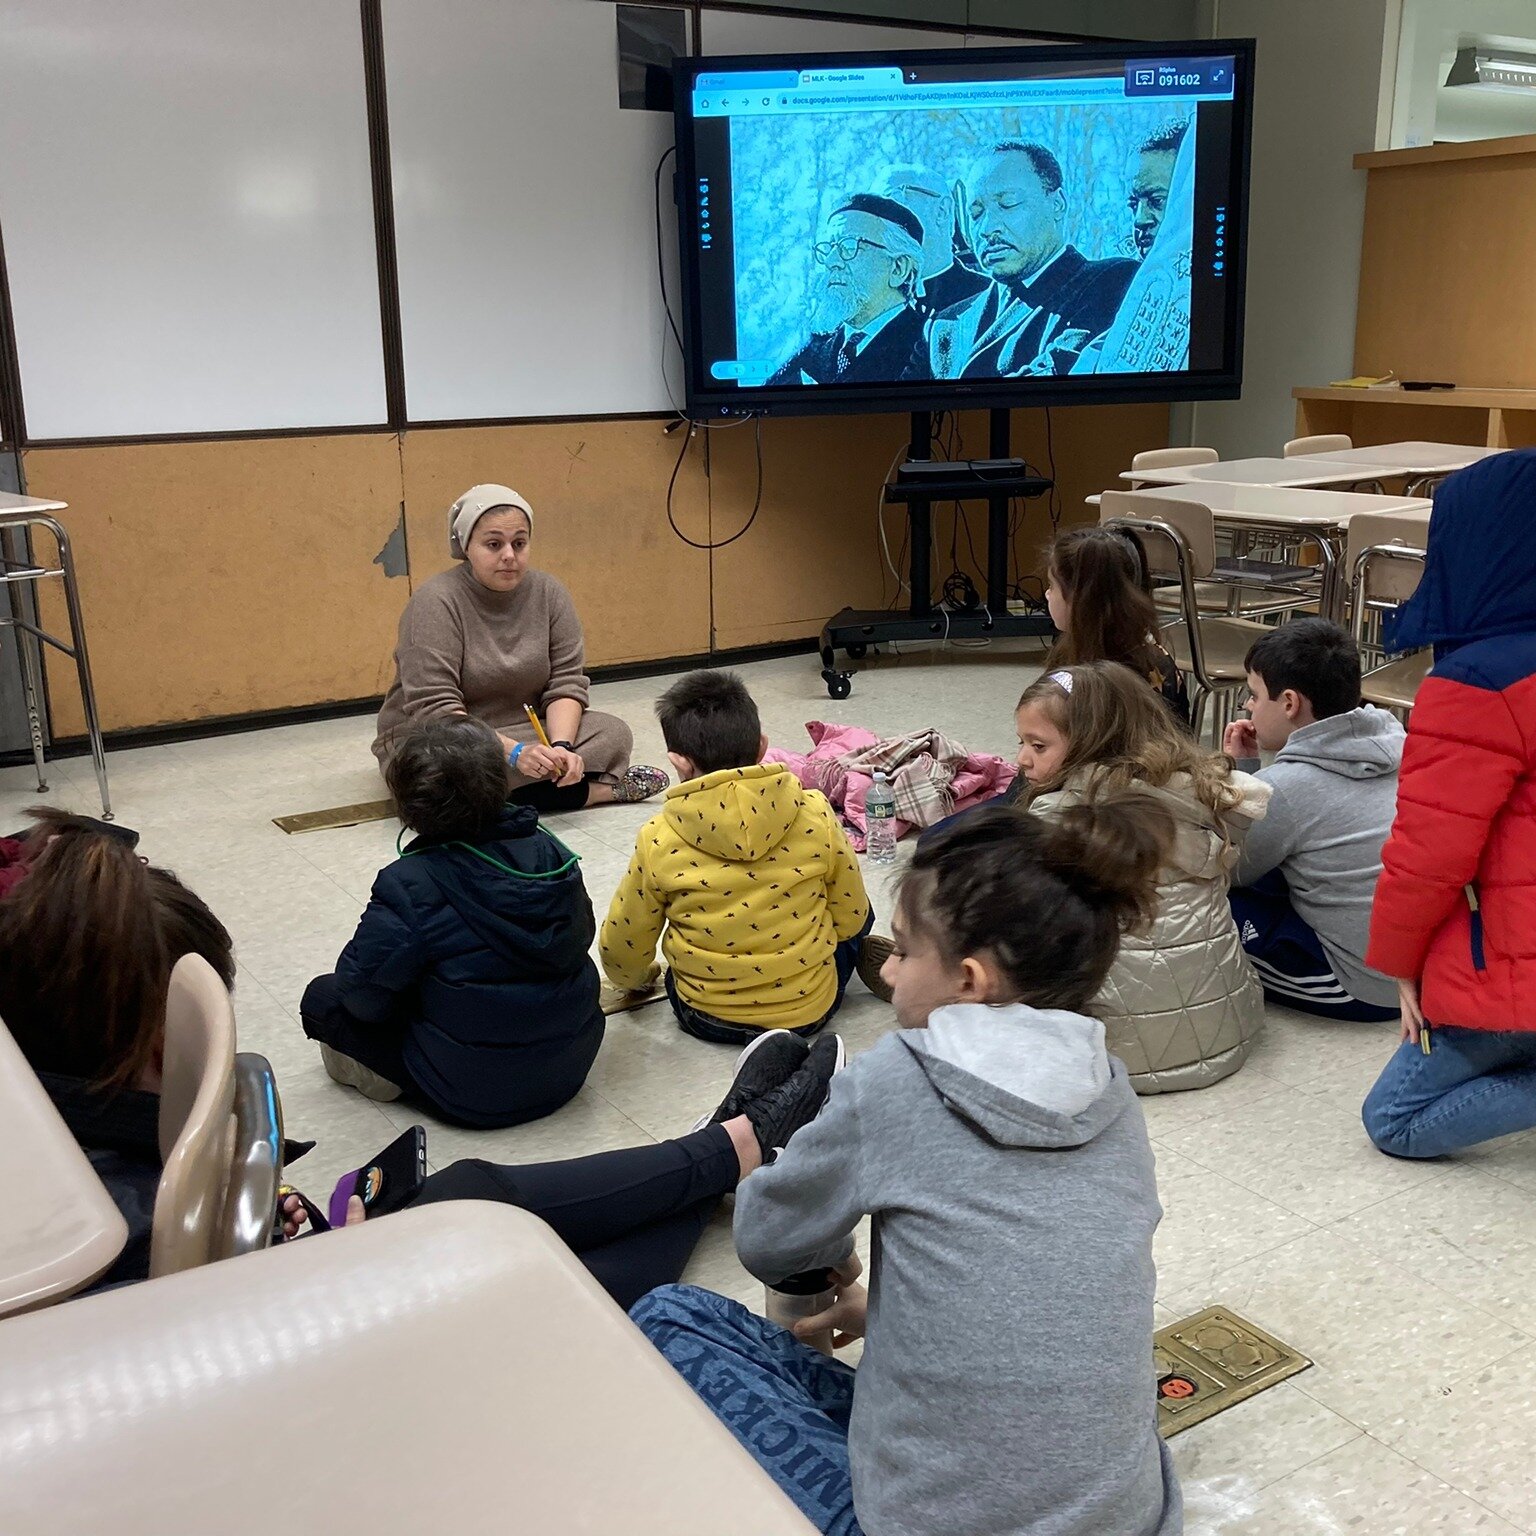 This week at JYC, we finished off our regular classes with a special learning program in honor of #MLKDay. 

We learned about the history of #Jewish leadership in the Civil Rights Movement, and the textual sources we have that emphasize preventing #i